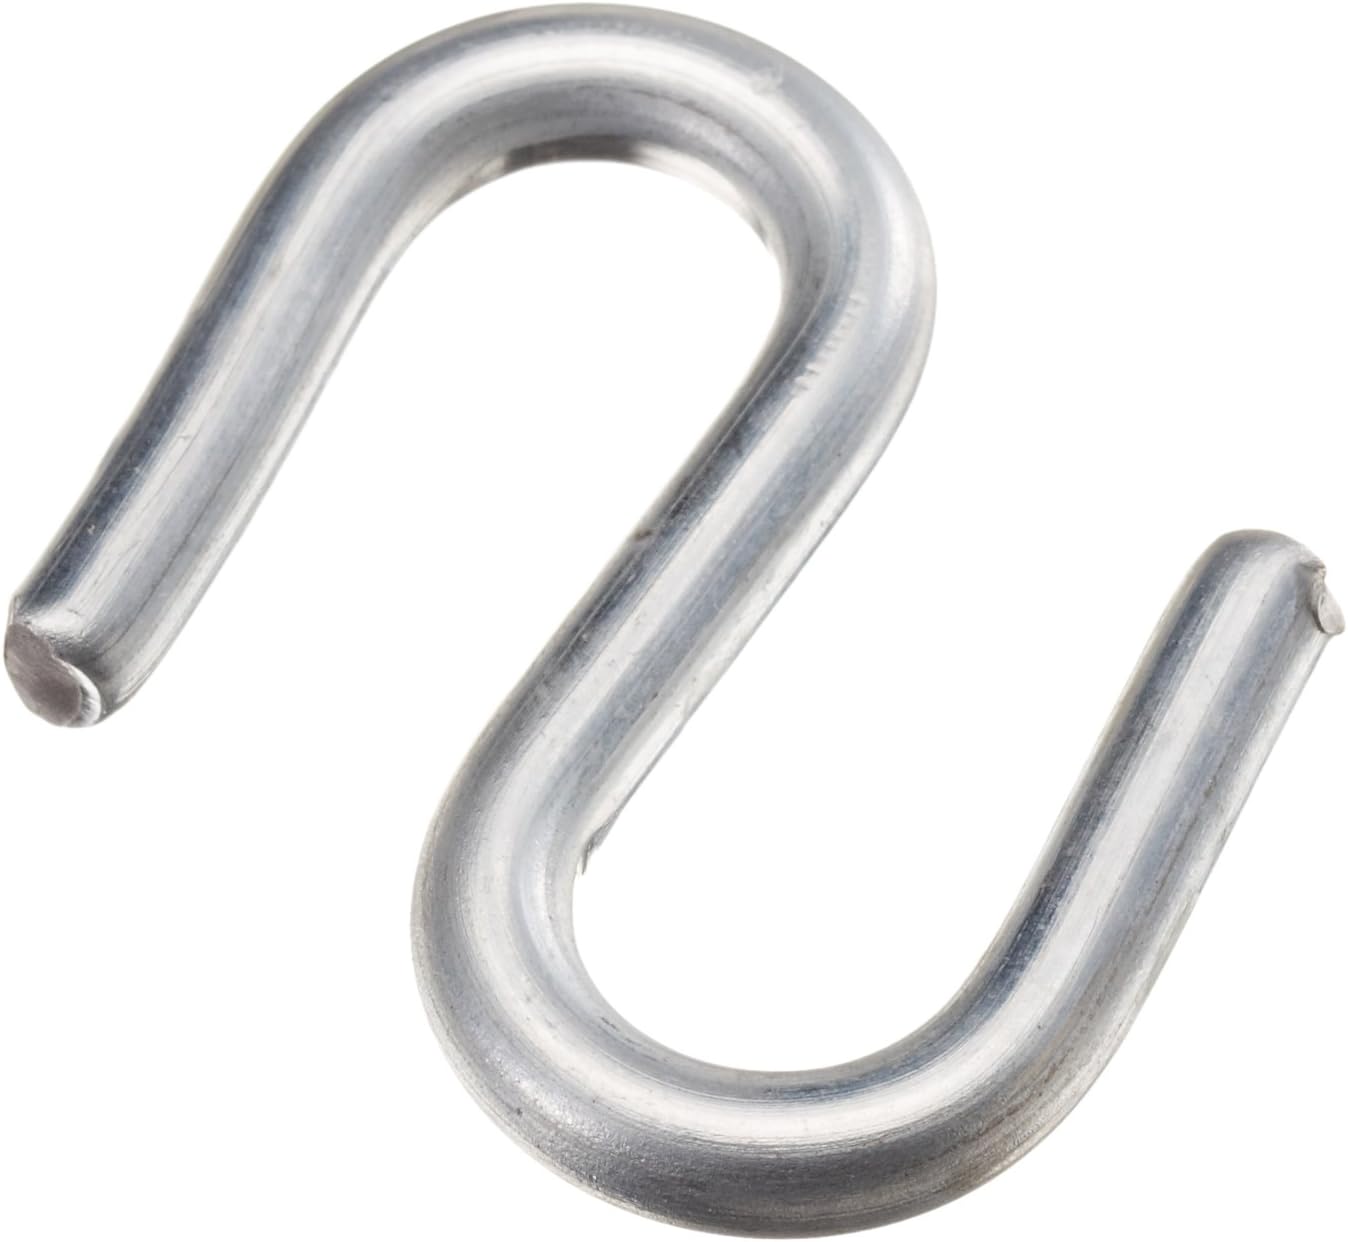 Agri-Fab - Replacement Parts Agri-Fab 44849 Hook, No. 32-Inchs-Inch